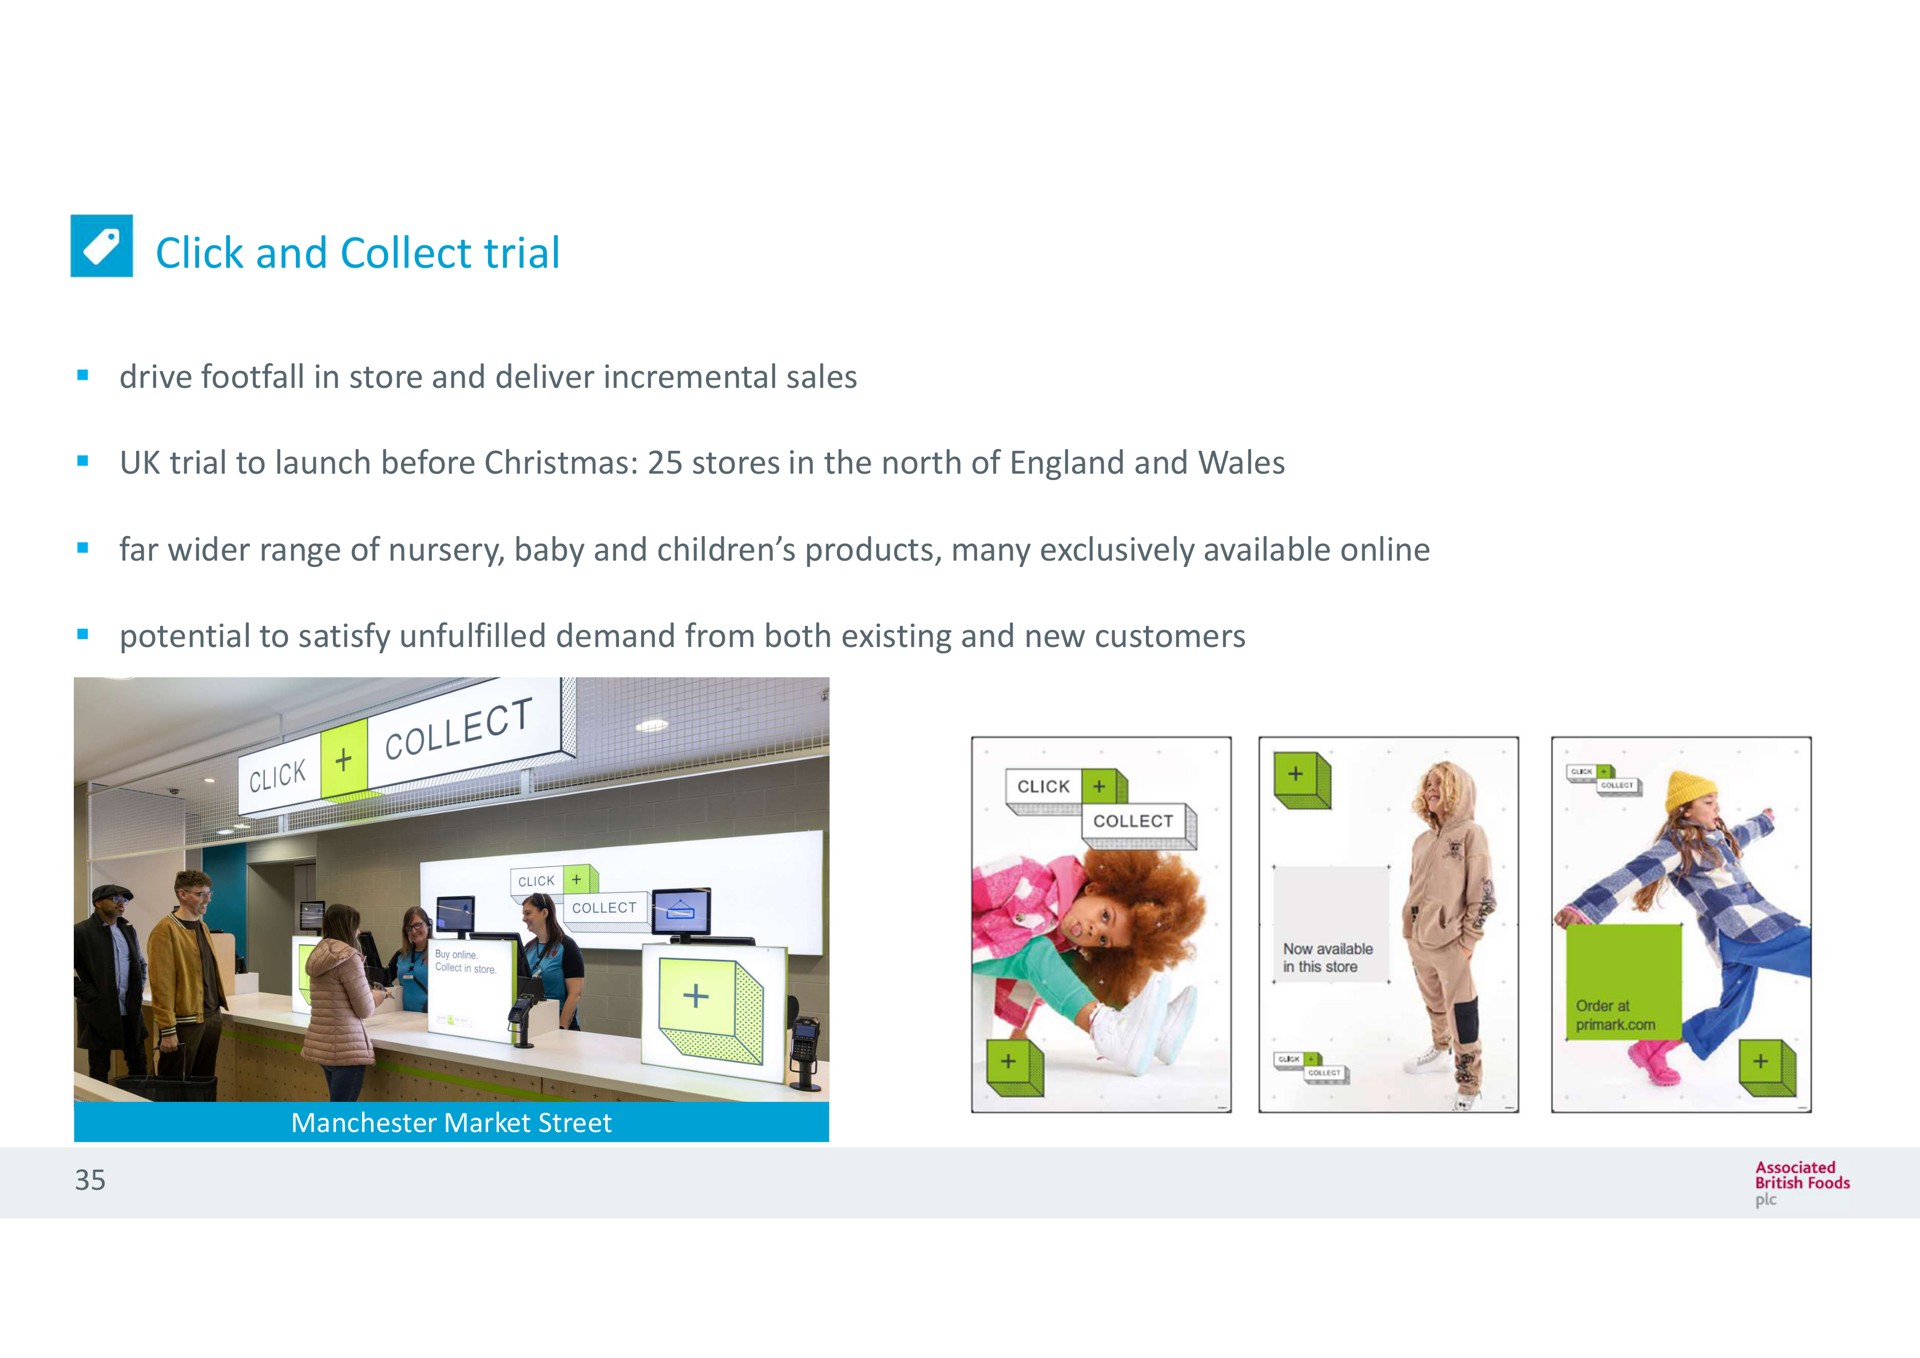 click and collect trial | Associated British Foods